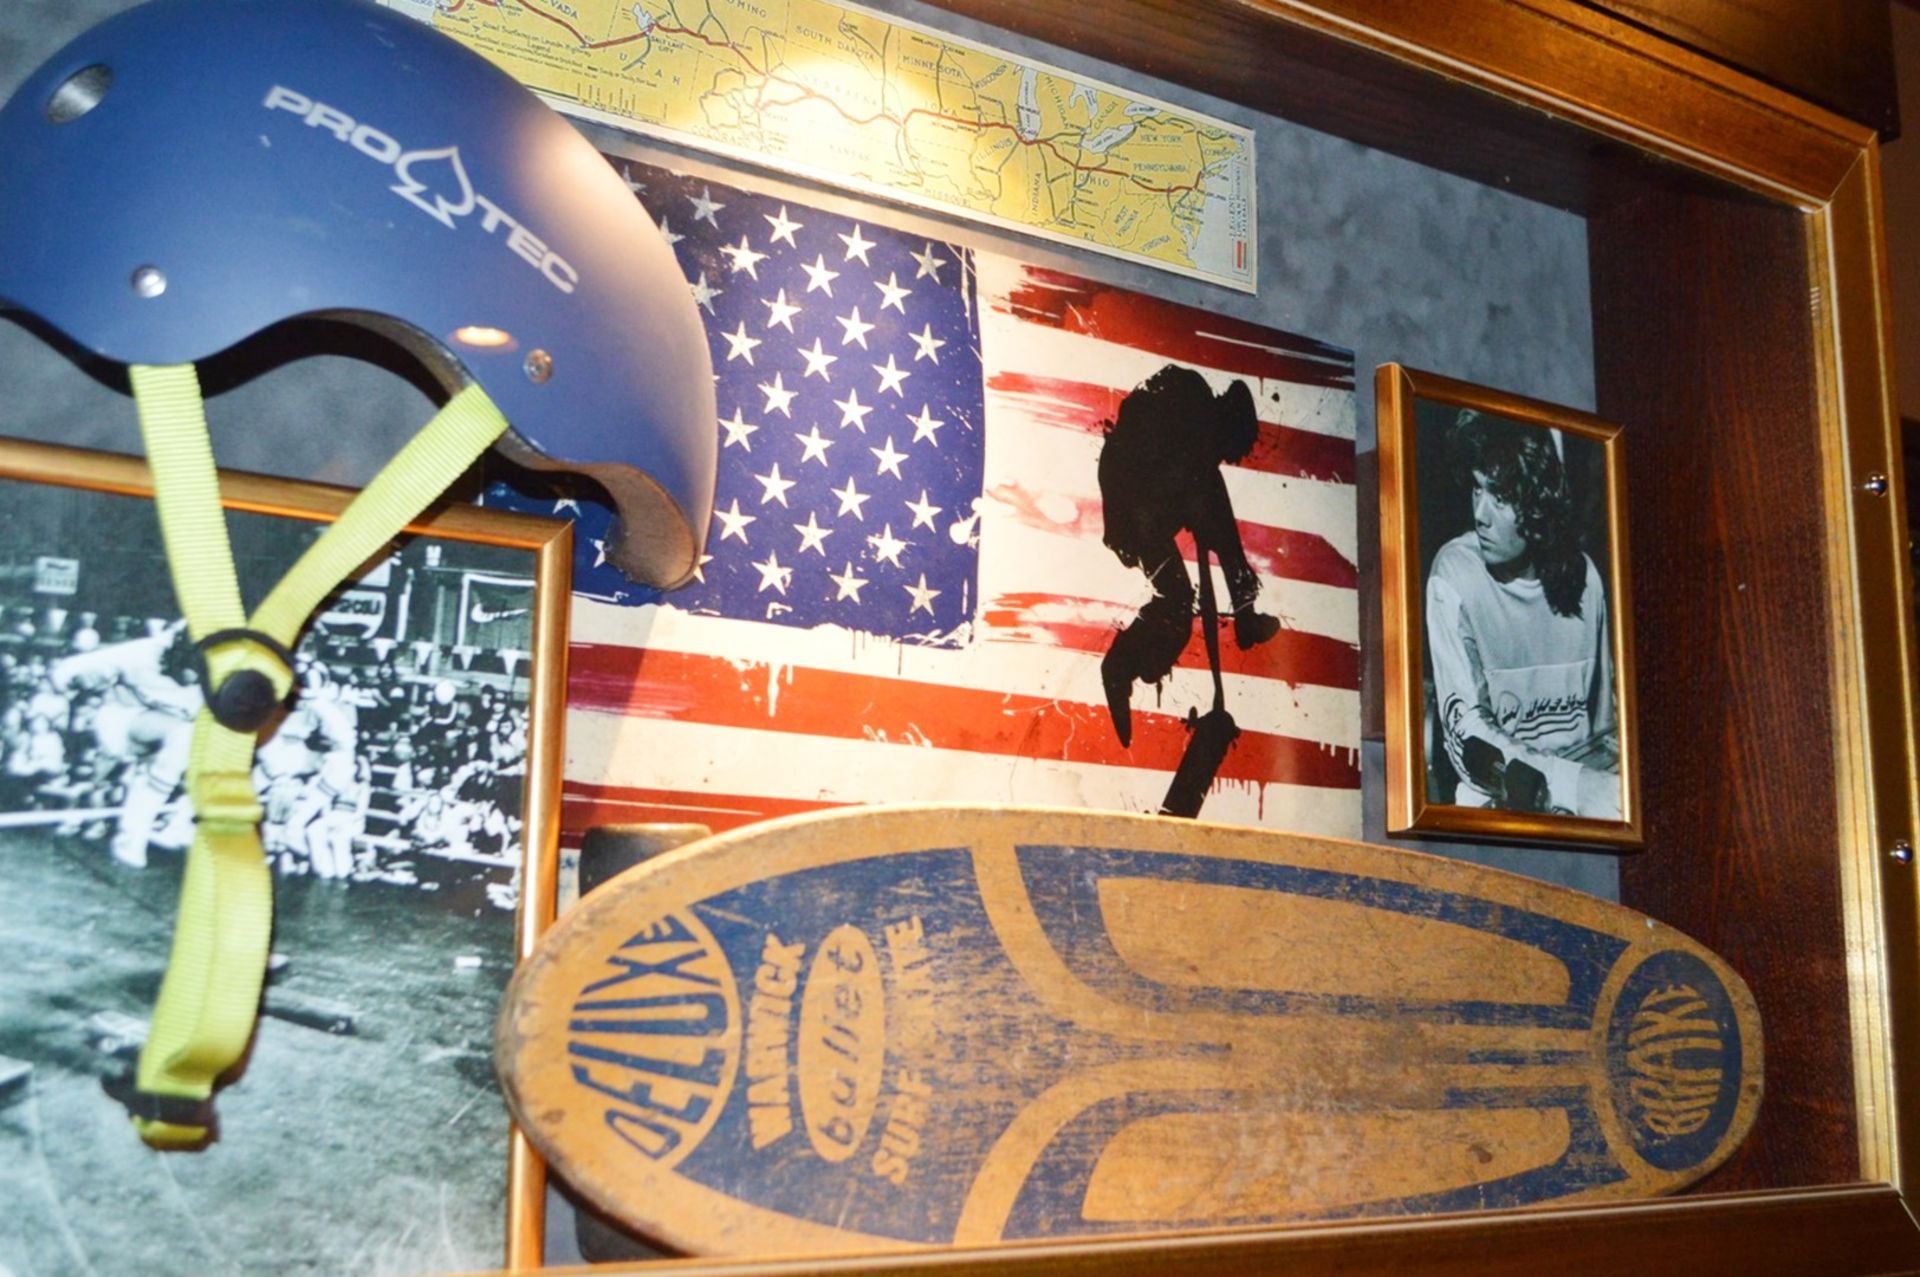 1 x Americana Wall Mounted Illuminated Display Case - SKATEBOARDING - Includes Various Images, - Image 2 of 8